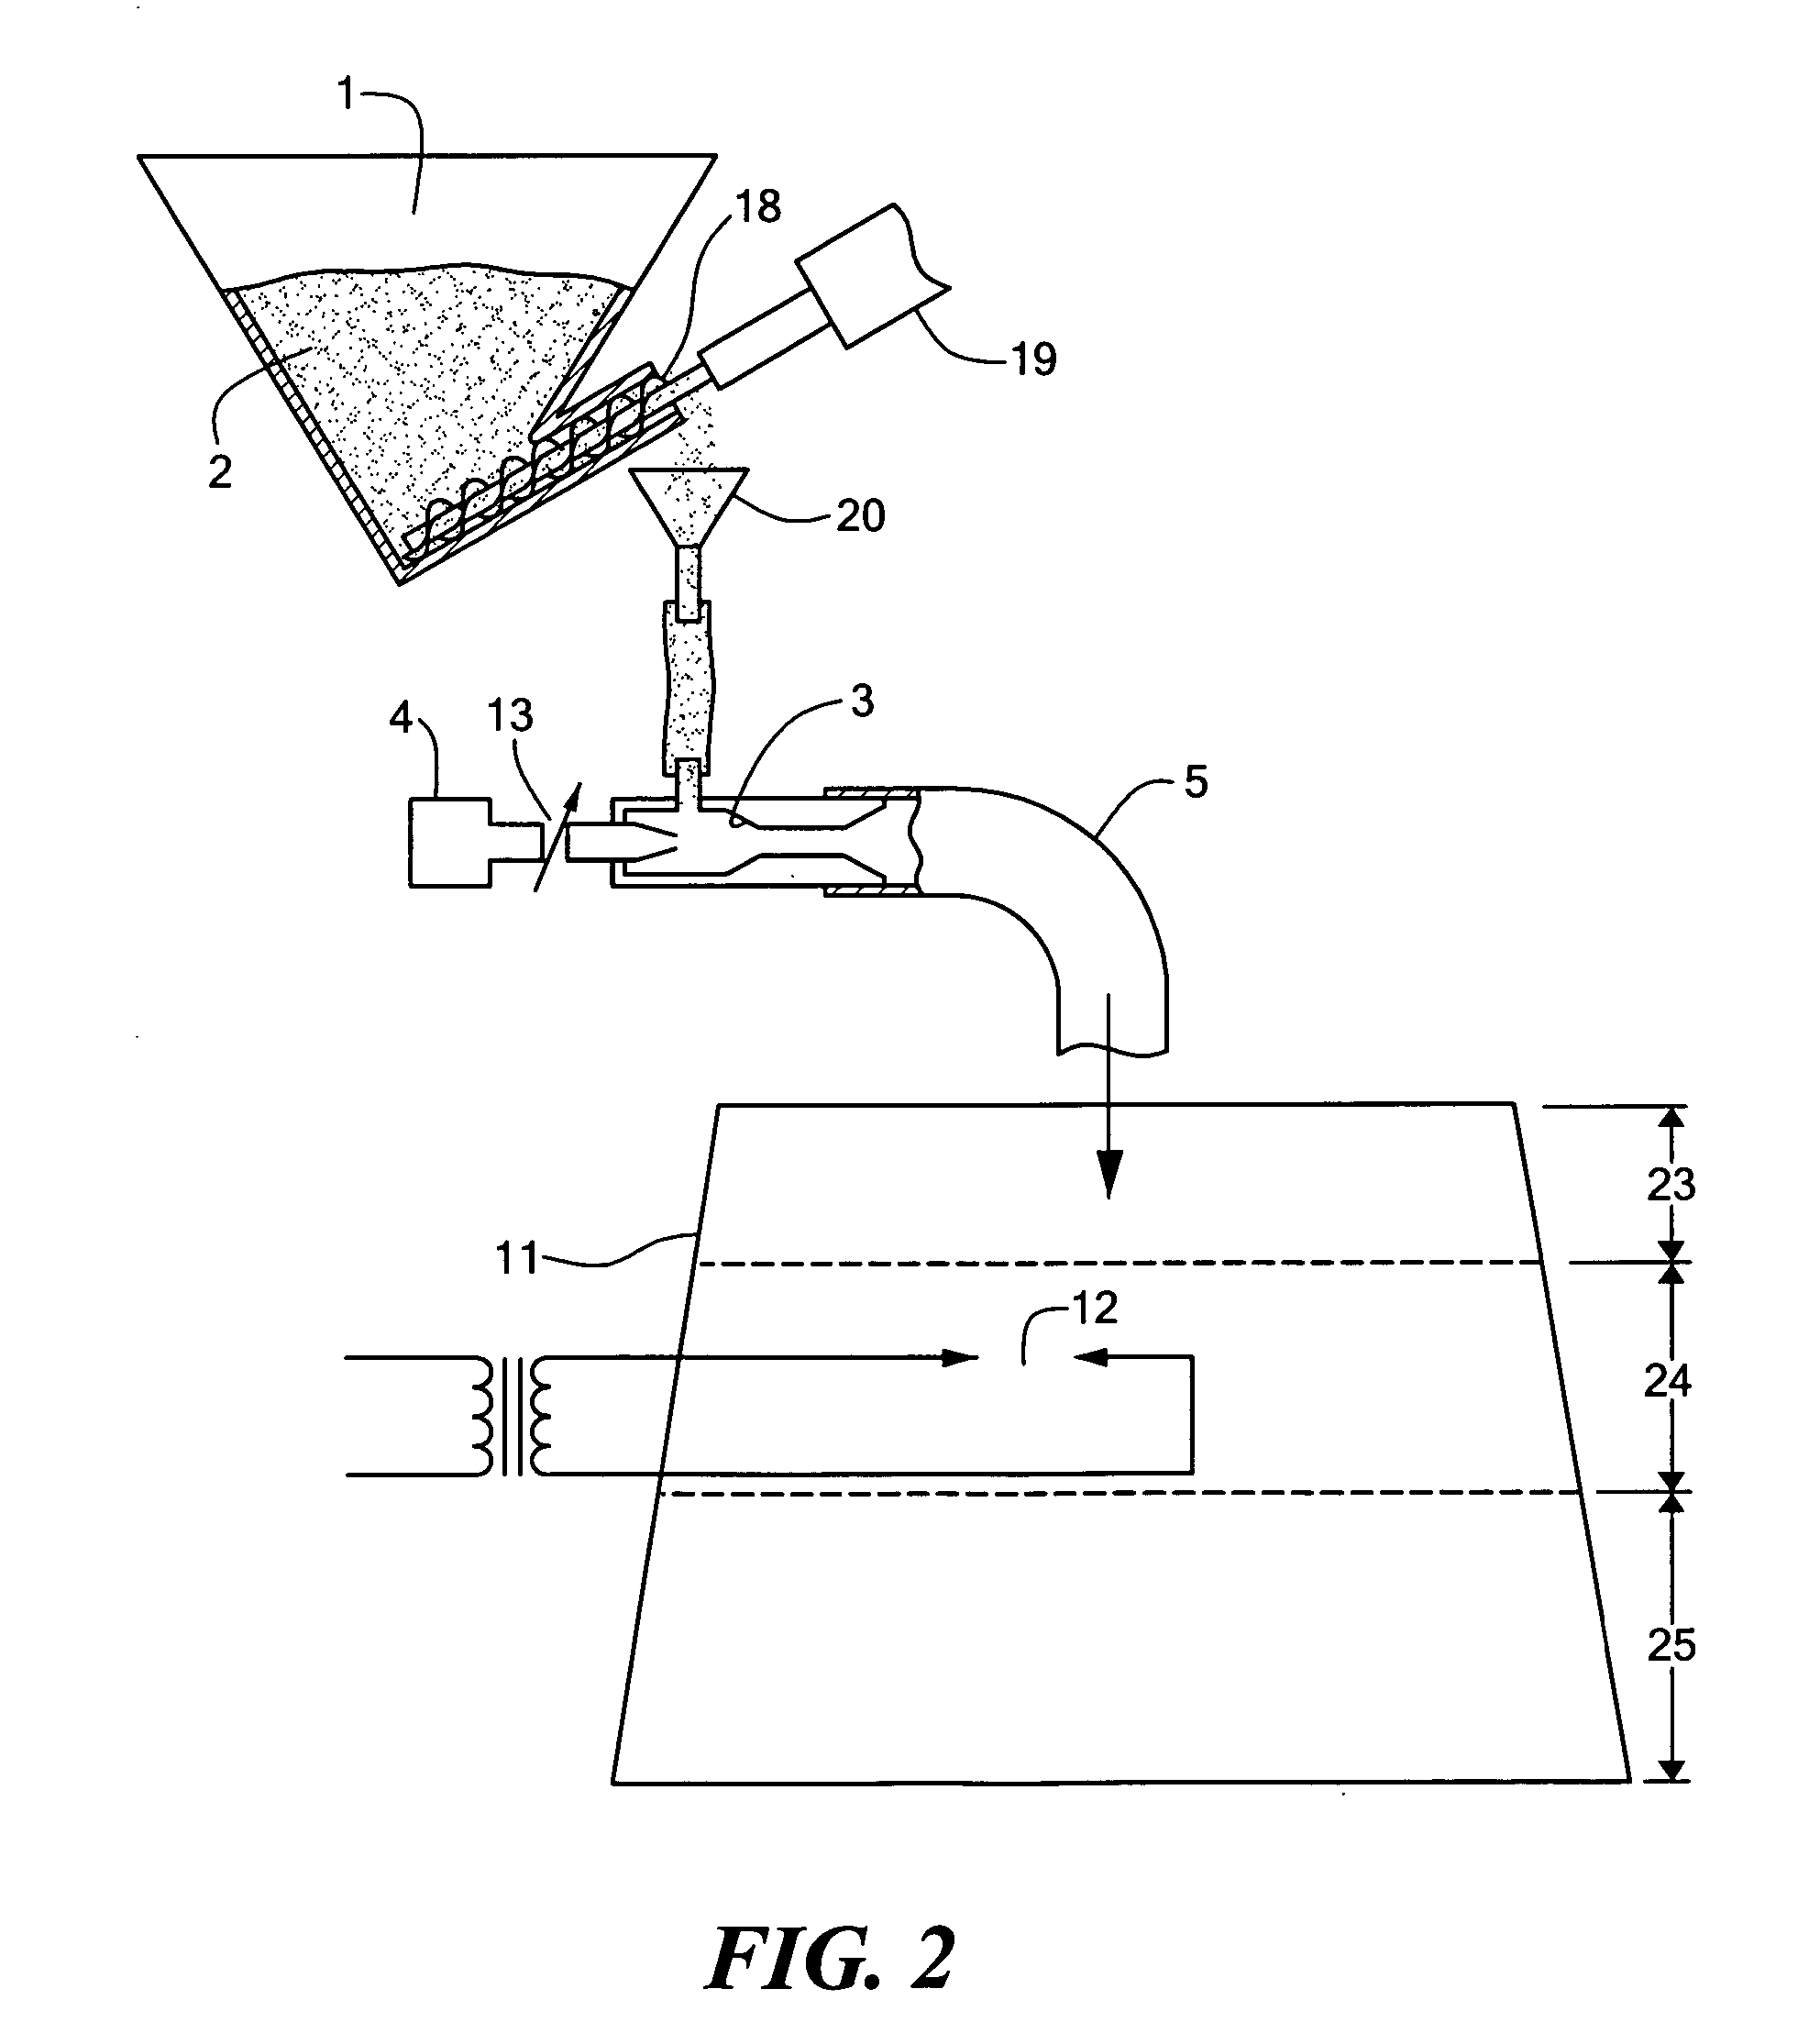 Flame spraying process and apparatus